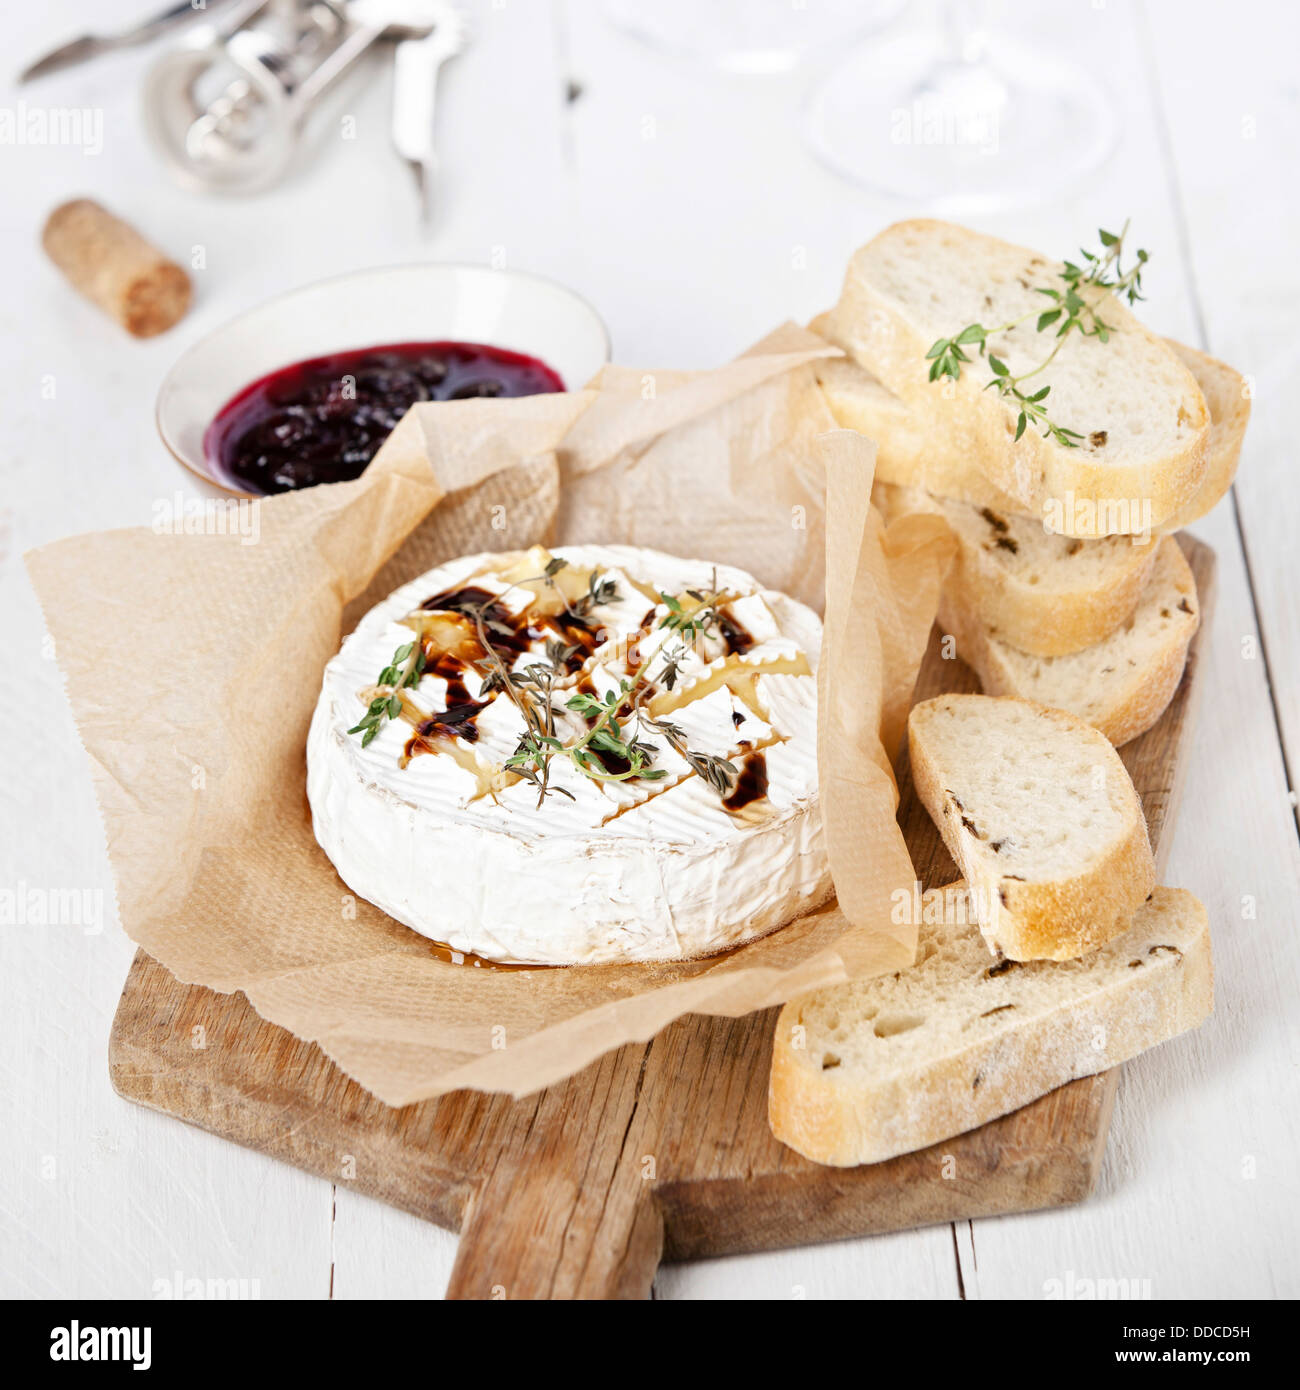 Baked Camembert cheese with thyme and toasted bread on wooden board Stock Photo